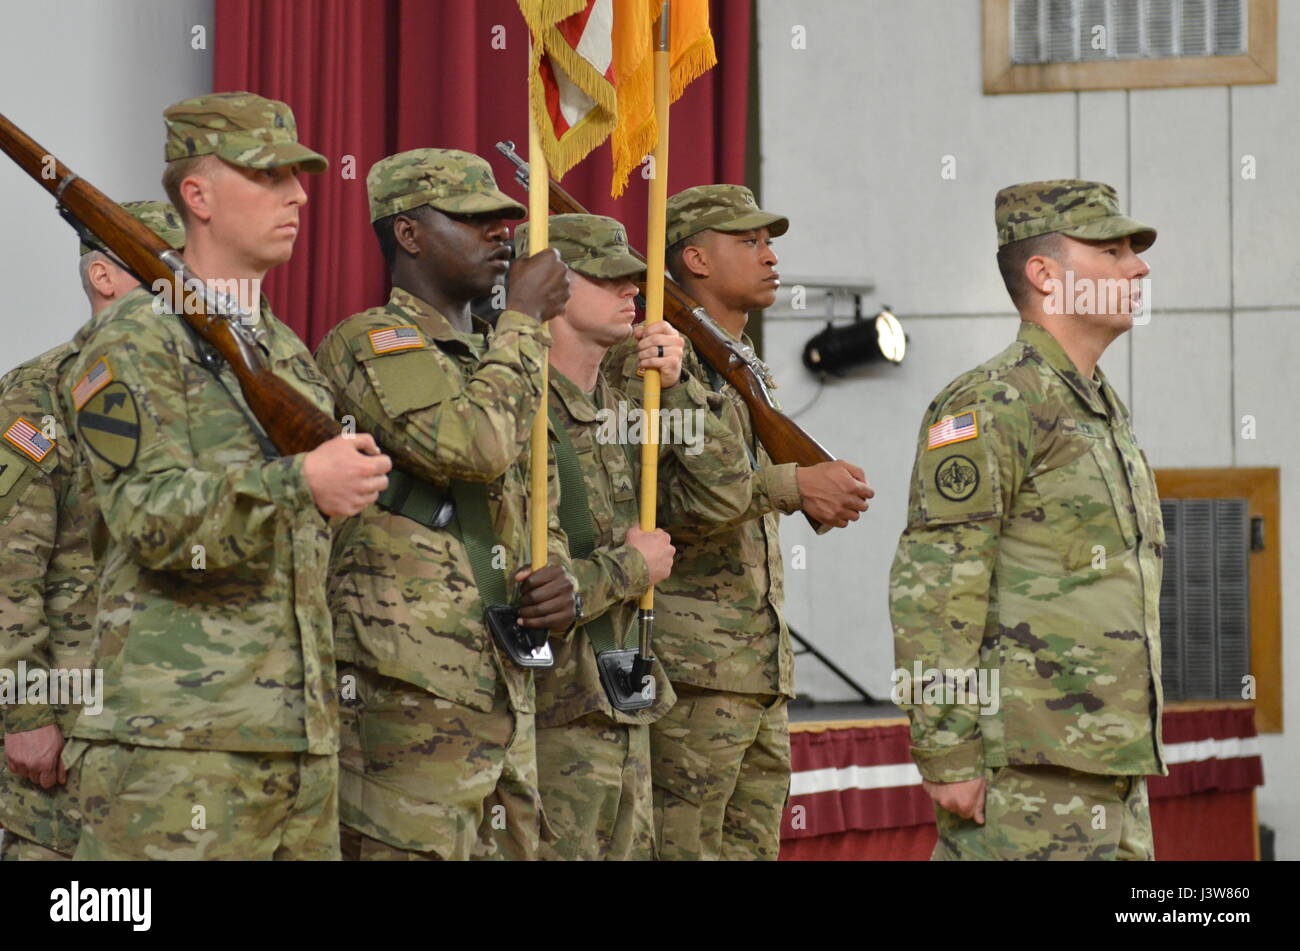 ADAZI, Latvia — Lt. Col. Jonathan S. Kluck, the new battalion commander of 1st Battalion, 68th Armor Regiment, 3rd Armored Brigade Combat Team, 4th Infantry Division, Fort Carson, Colorado, leads his new unit in the 4th Inf. Div. song and the Army song during the change of command ceremony in the theater at Adazi Military Base, Latvia, May 4, 2017.  The unit is deployed into Europe for Operation Atlantic Resolve,  a U.S. -led endeavor to fulfill the U.S. commitment to NATO by rotating throughout Europe and training alongside NATO Allies and partners. (Sgt. Shiloh Capers) Stock Photo